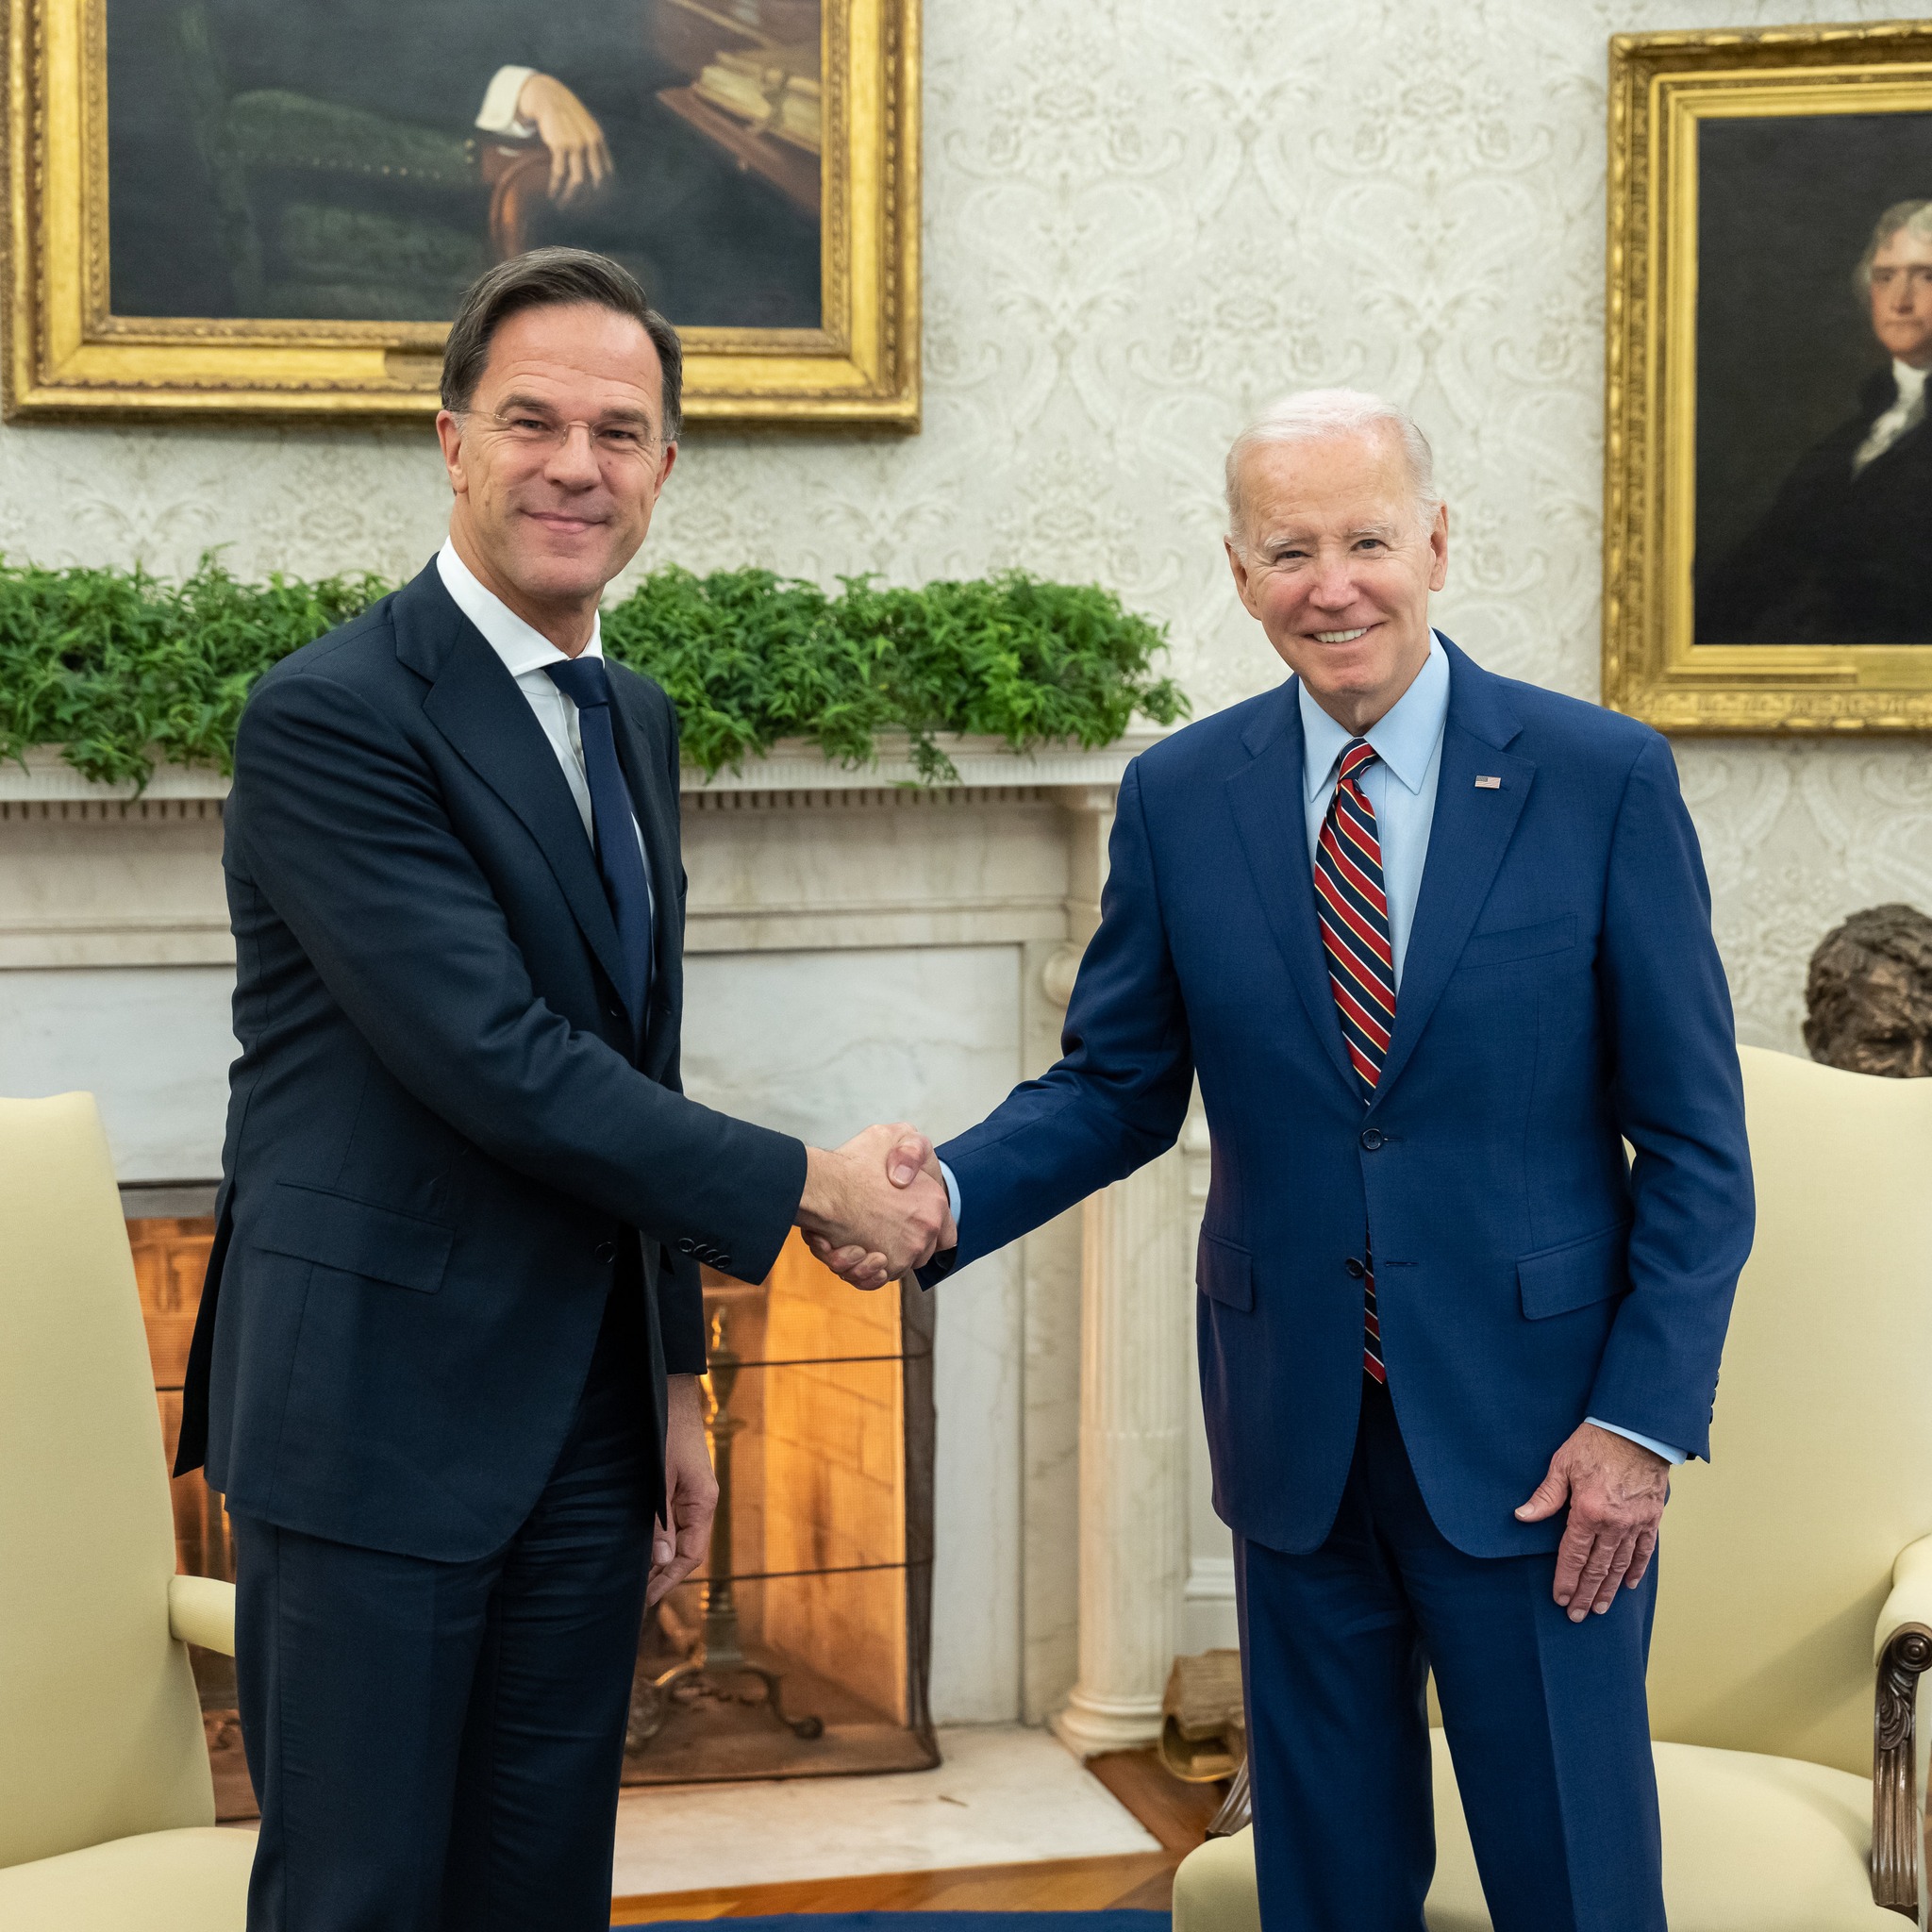 Watch: President Biden and Dutch Prime Minister Rutte meet at the White House to discuss China and Ukraine